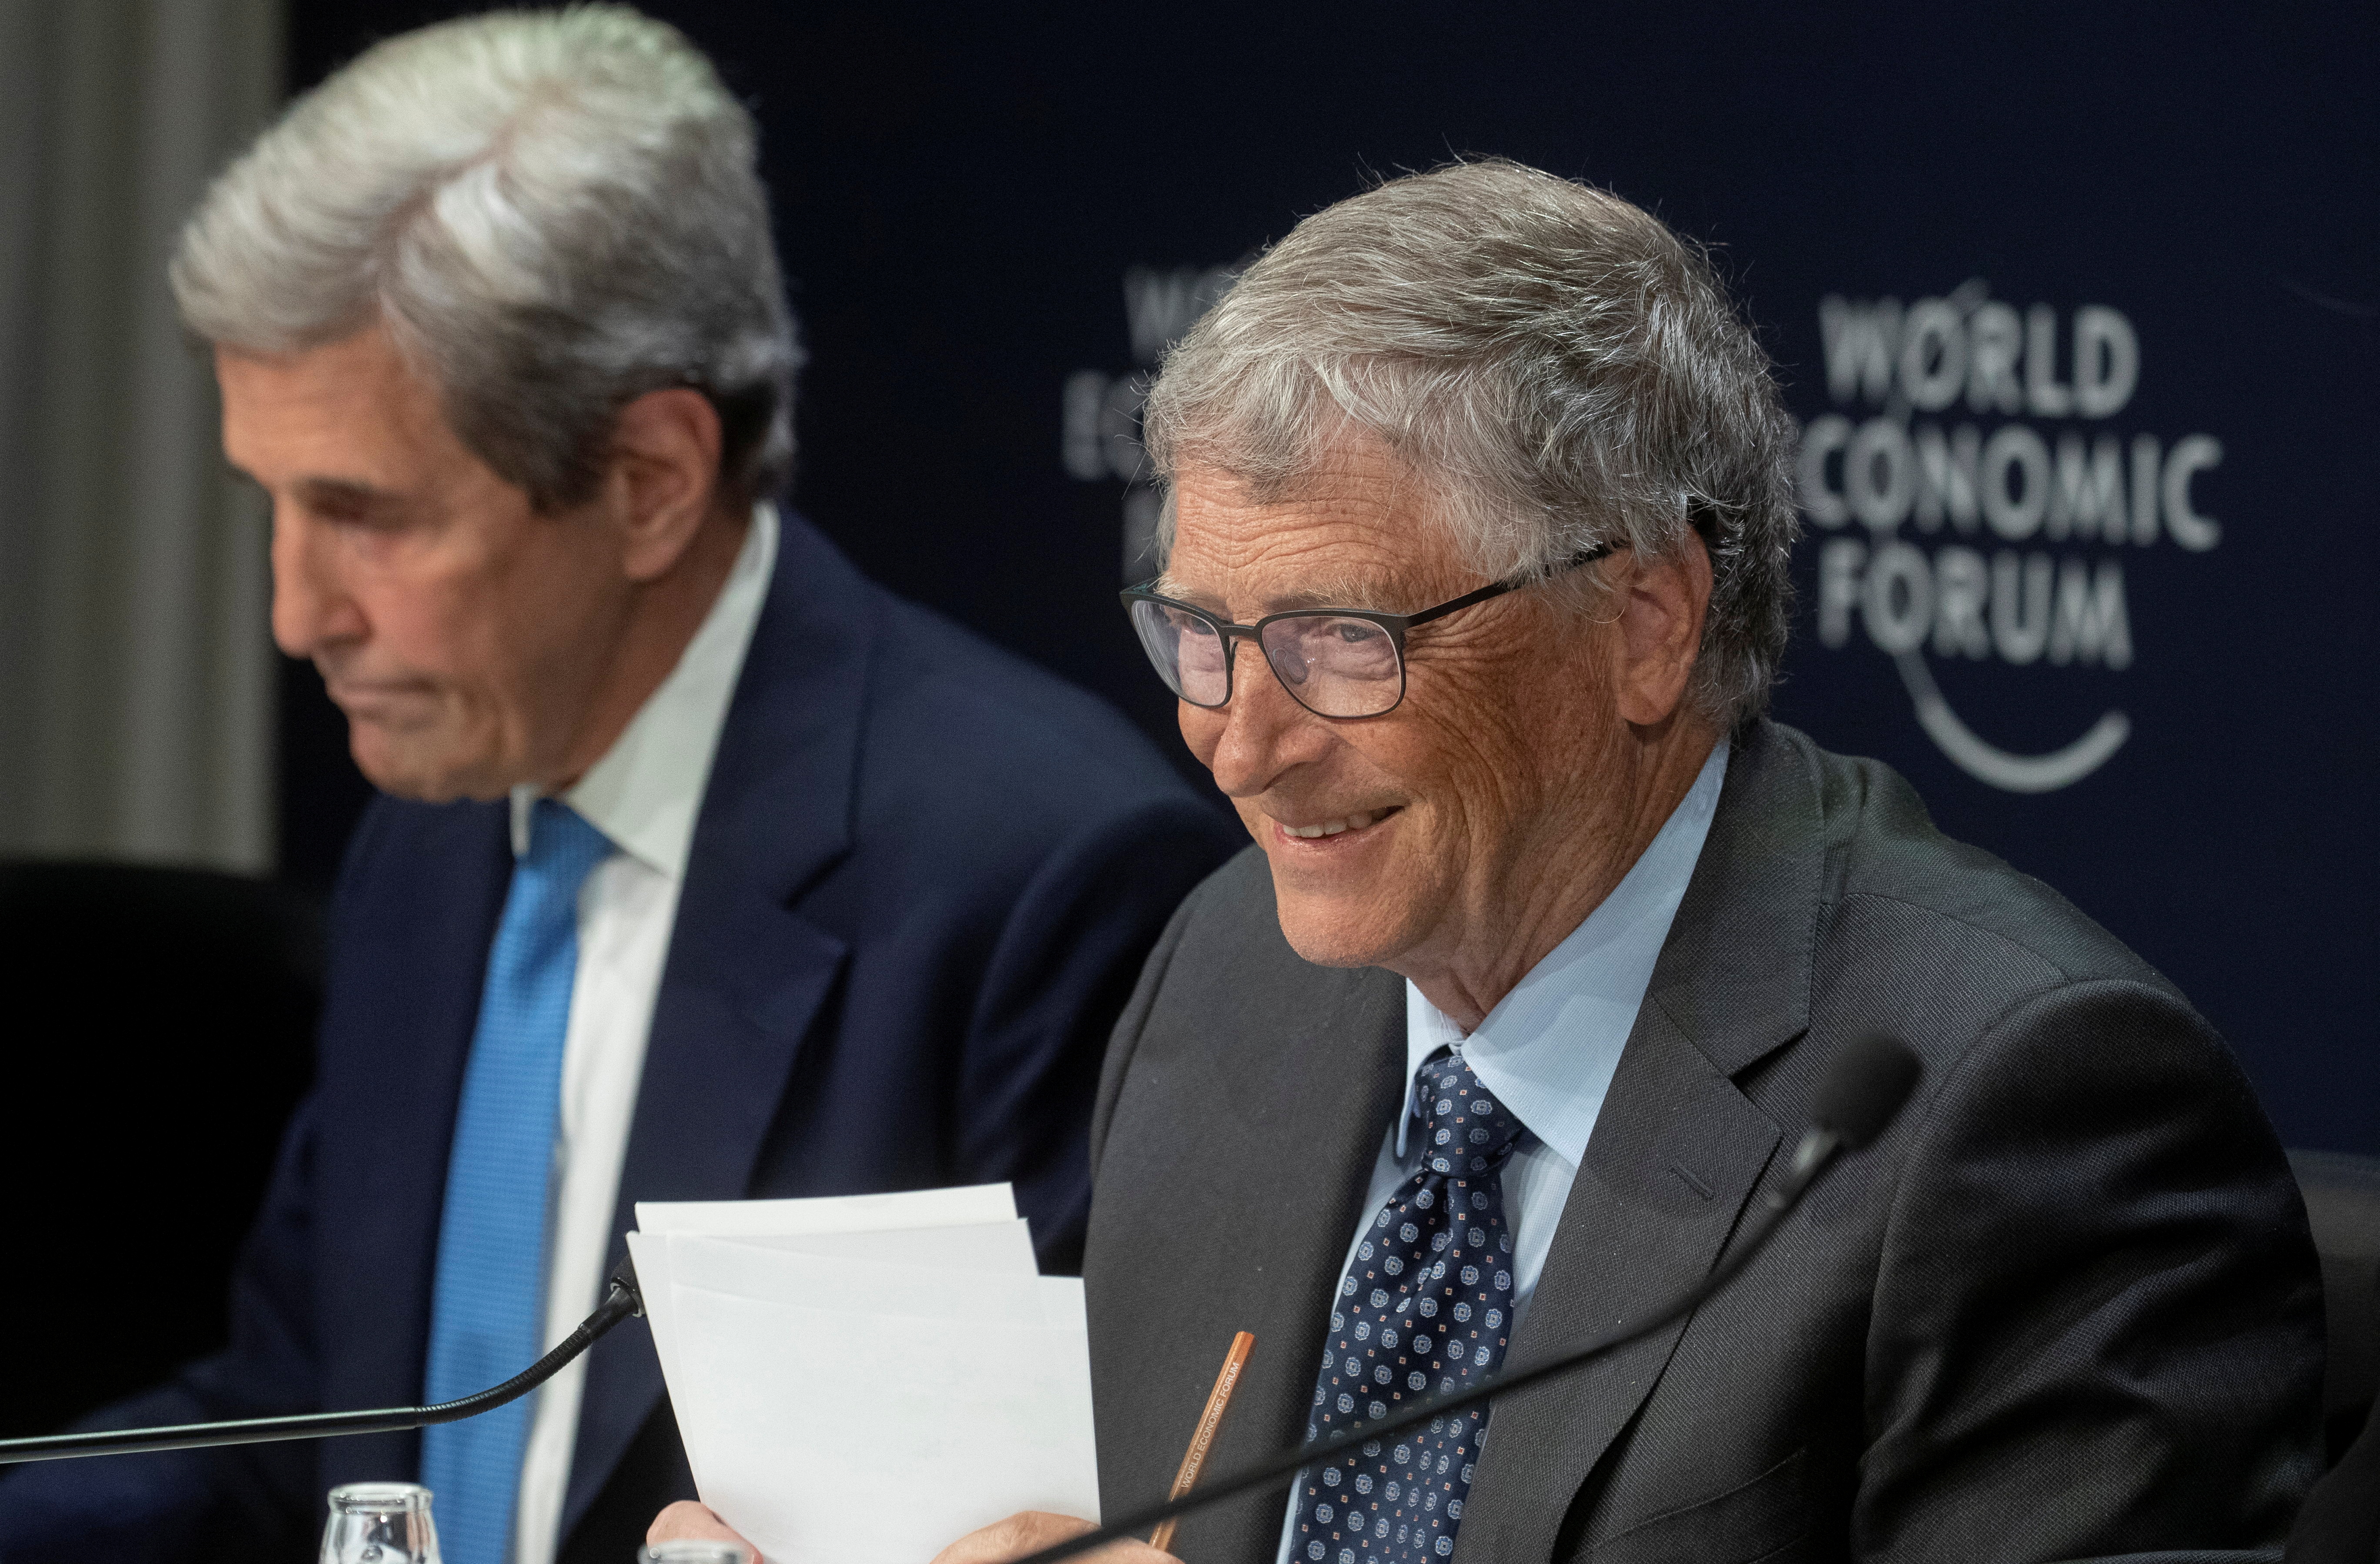 U.S. climate envoy Kerry and Bill Gates, attend a news conference in Davos